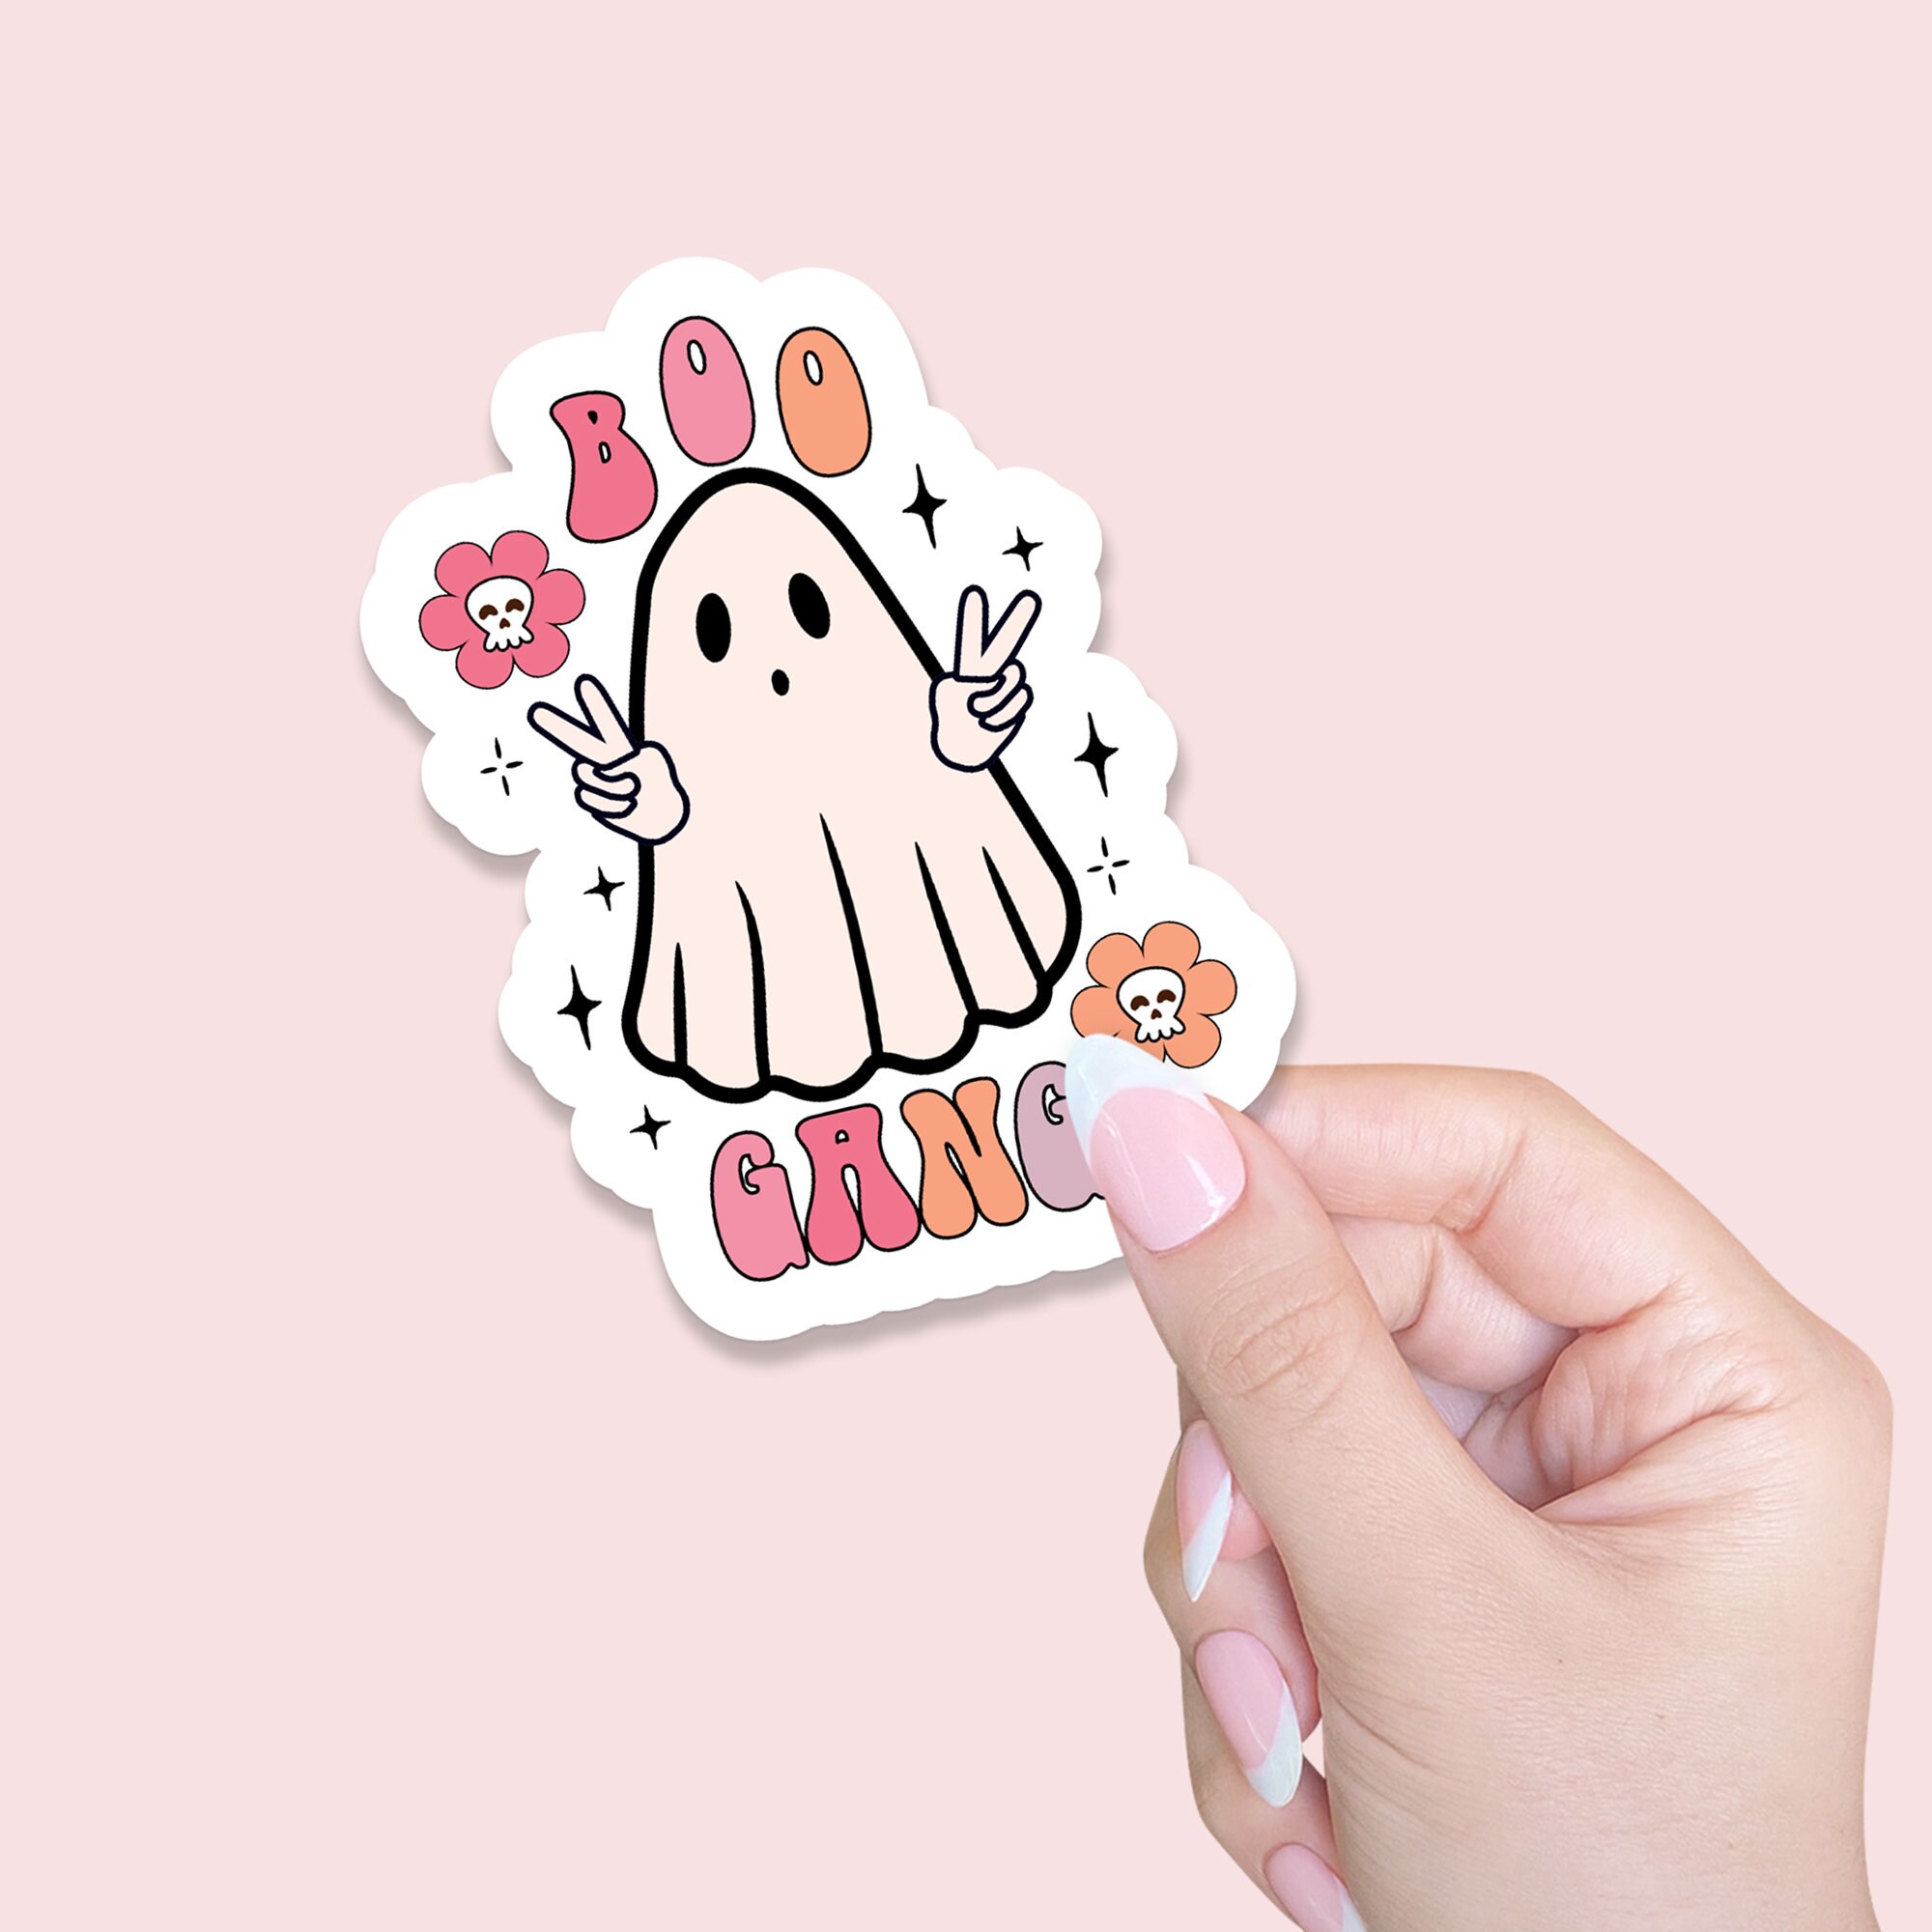 Discover Boo Gang Cute Retro Ghost Halloween Vinyl Sticker, Vintage, Peace Sign, Book Stickers, Planner, Note Book, Water Bottle, Water Resistant